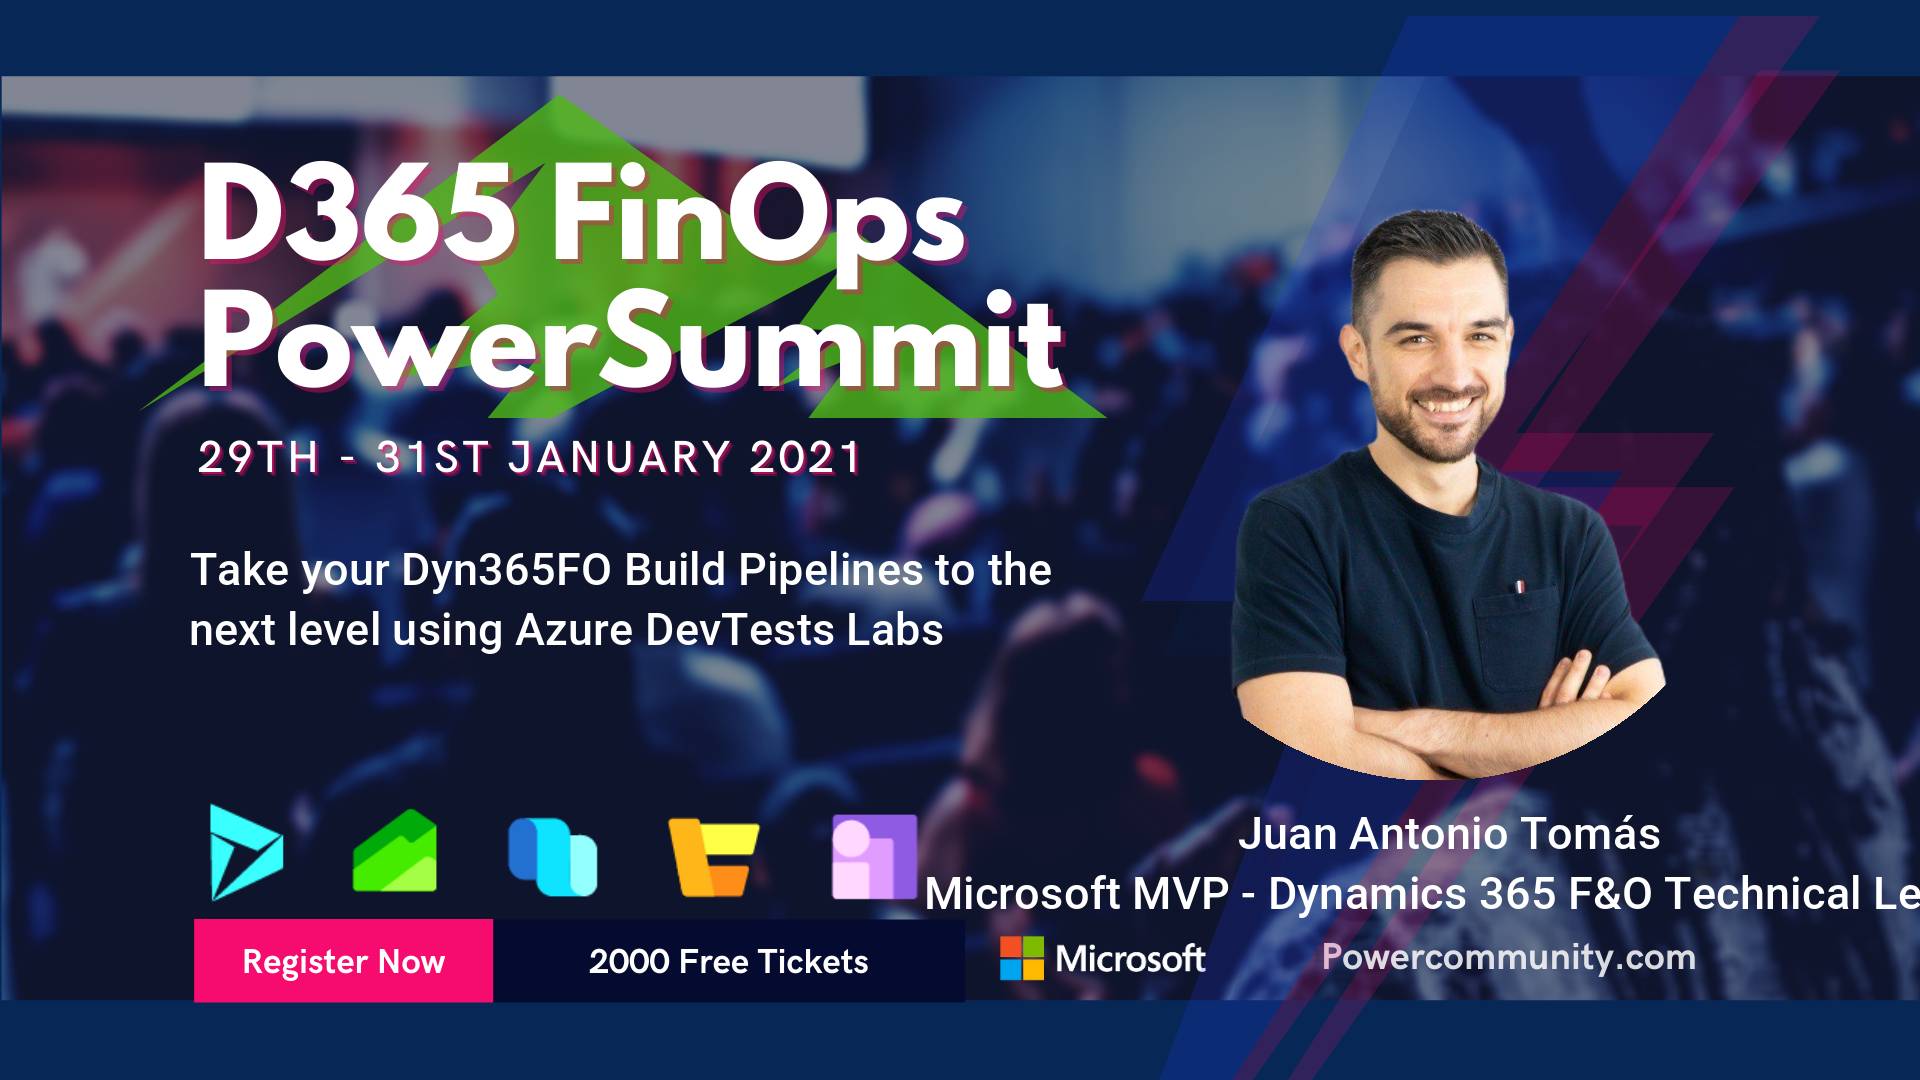 Take your Dyn365FO Build Pipelines to the next level using Azure DevTests Labs